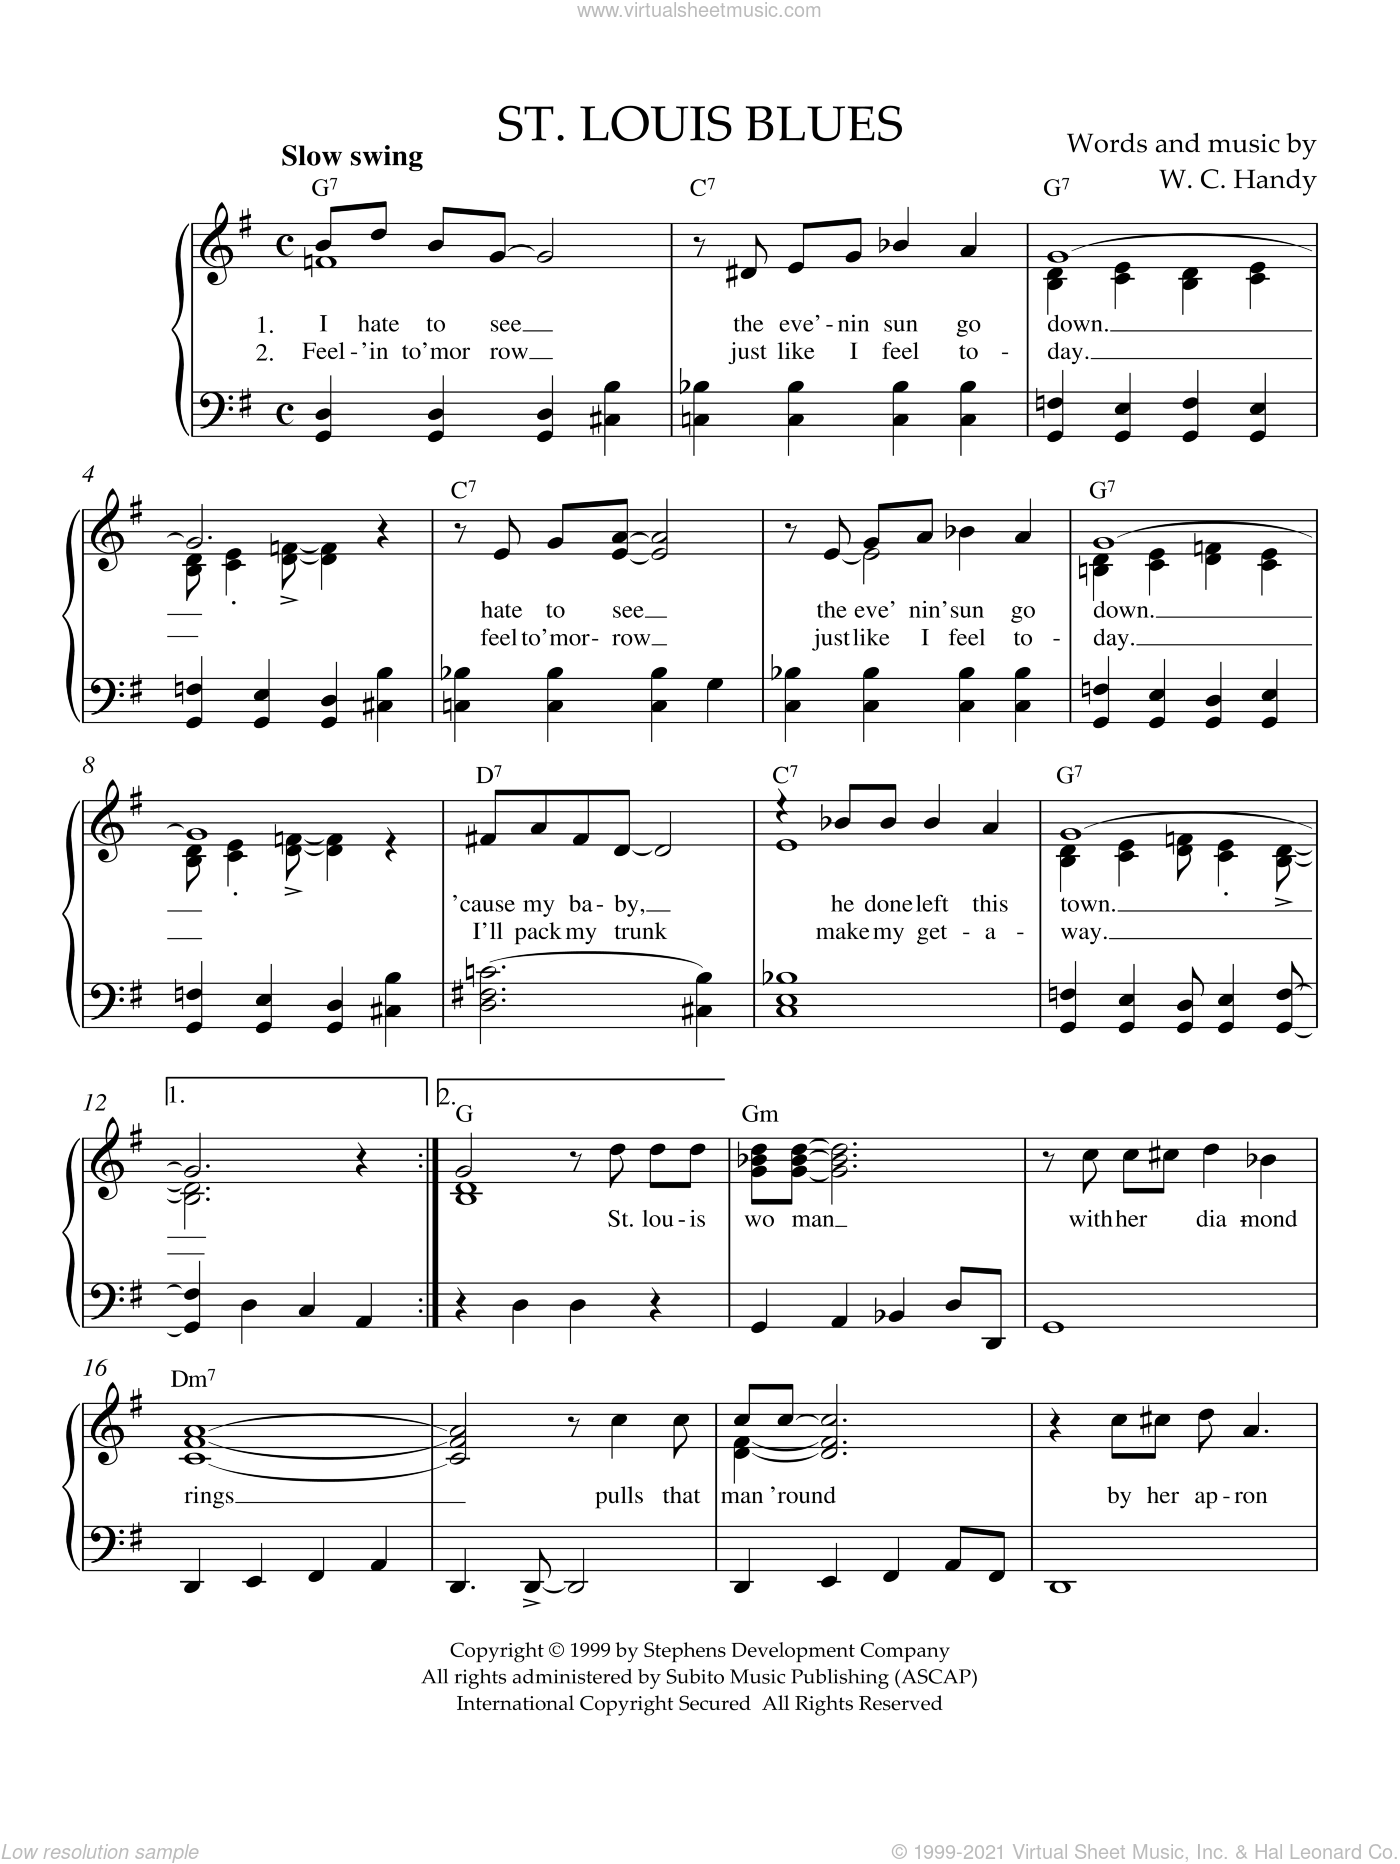 Handy - St. Louis Blues sheet music (easy version 2) for piano solo